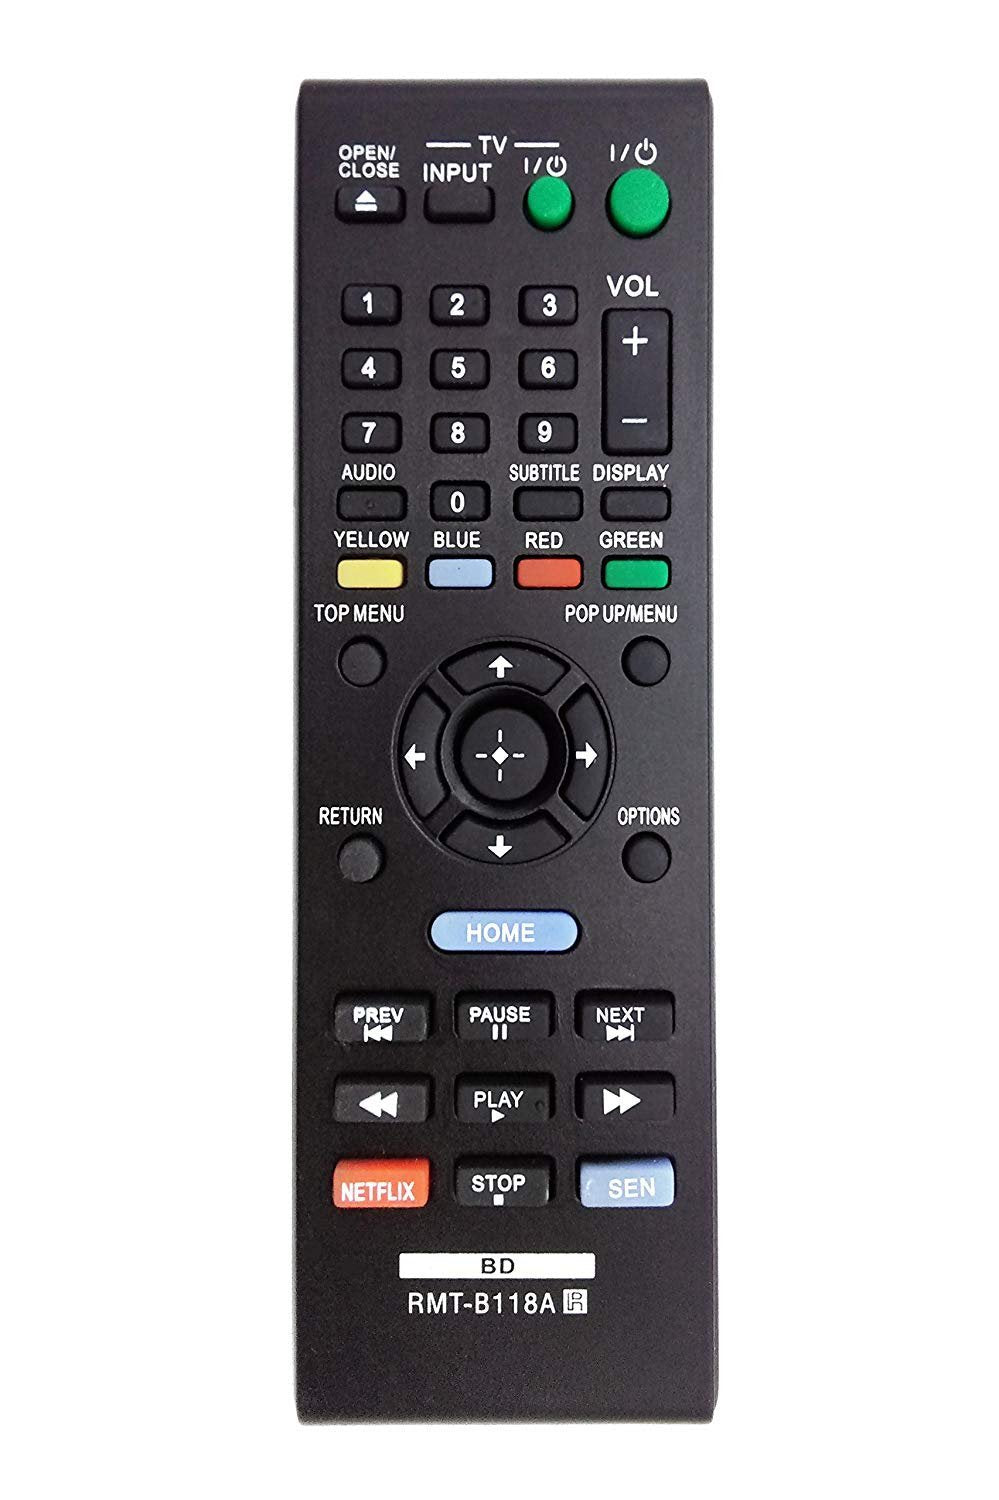 New Universal RMT-B118A RMT-B119A Remote Control for Sony Blu-Ray DVD Player BDP-S185 BDP-BX18 BDP-BX510 BDP-BX59 BDP-S1100 BDP-S3100 BDP-S5100 BDP-S390 BDP-S590